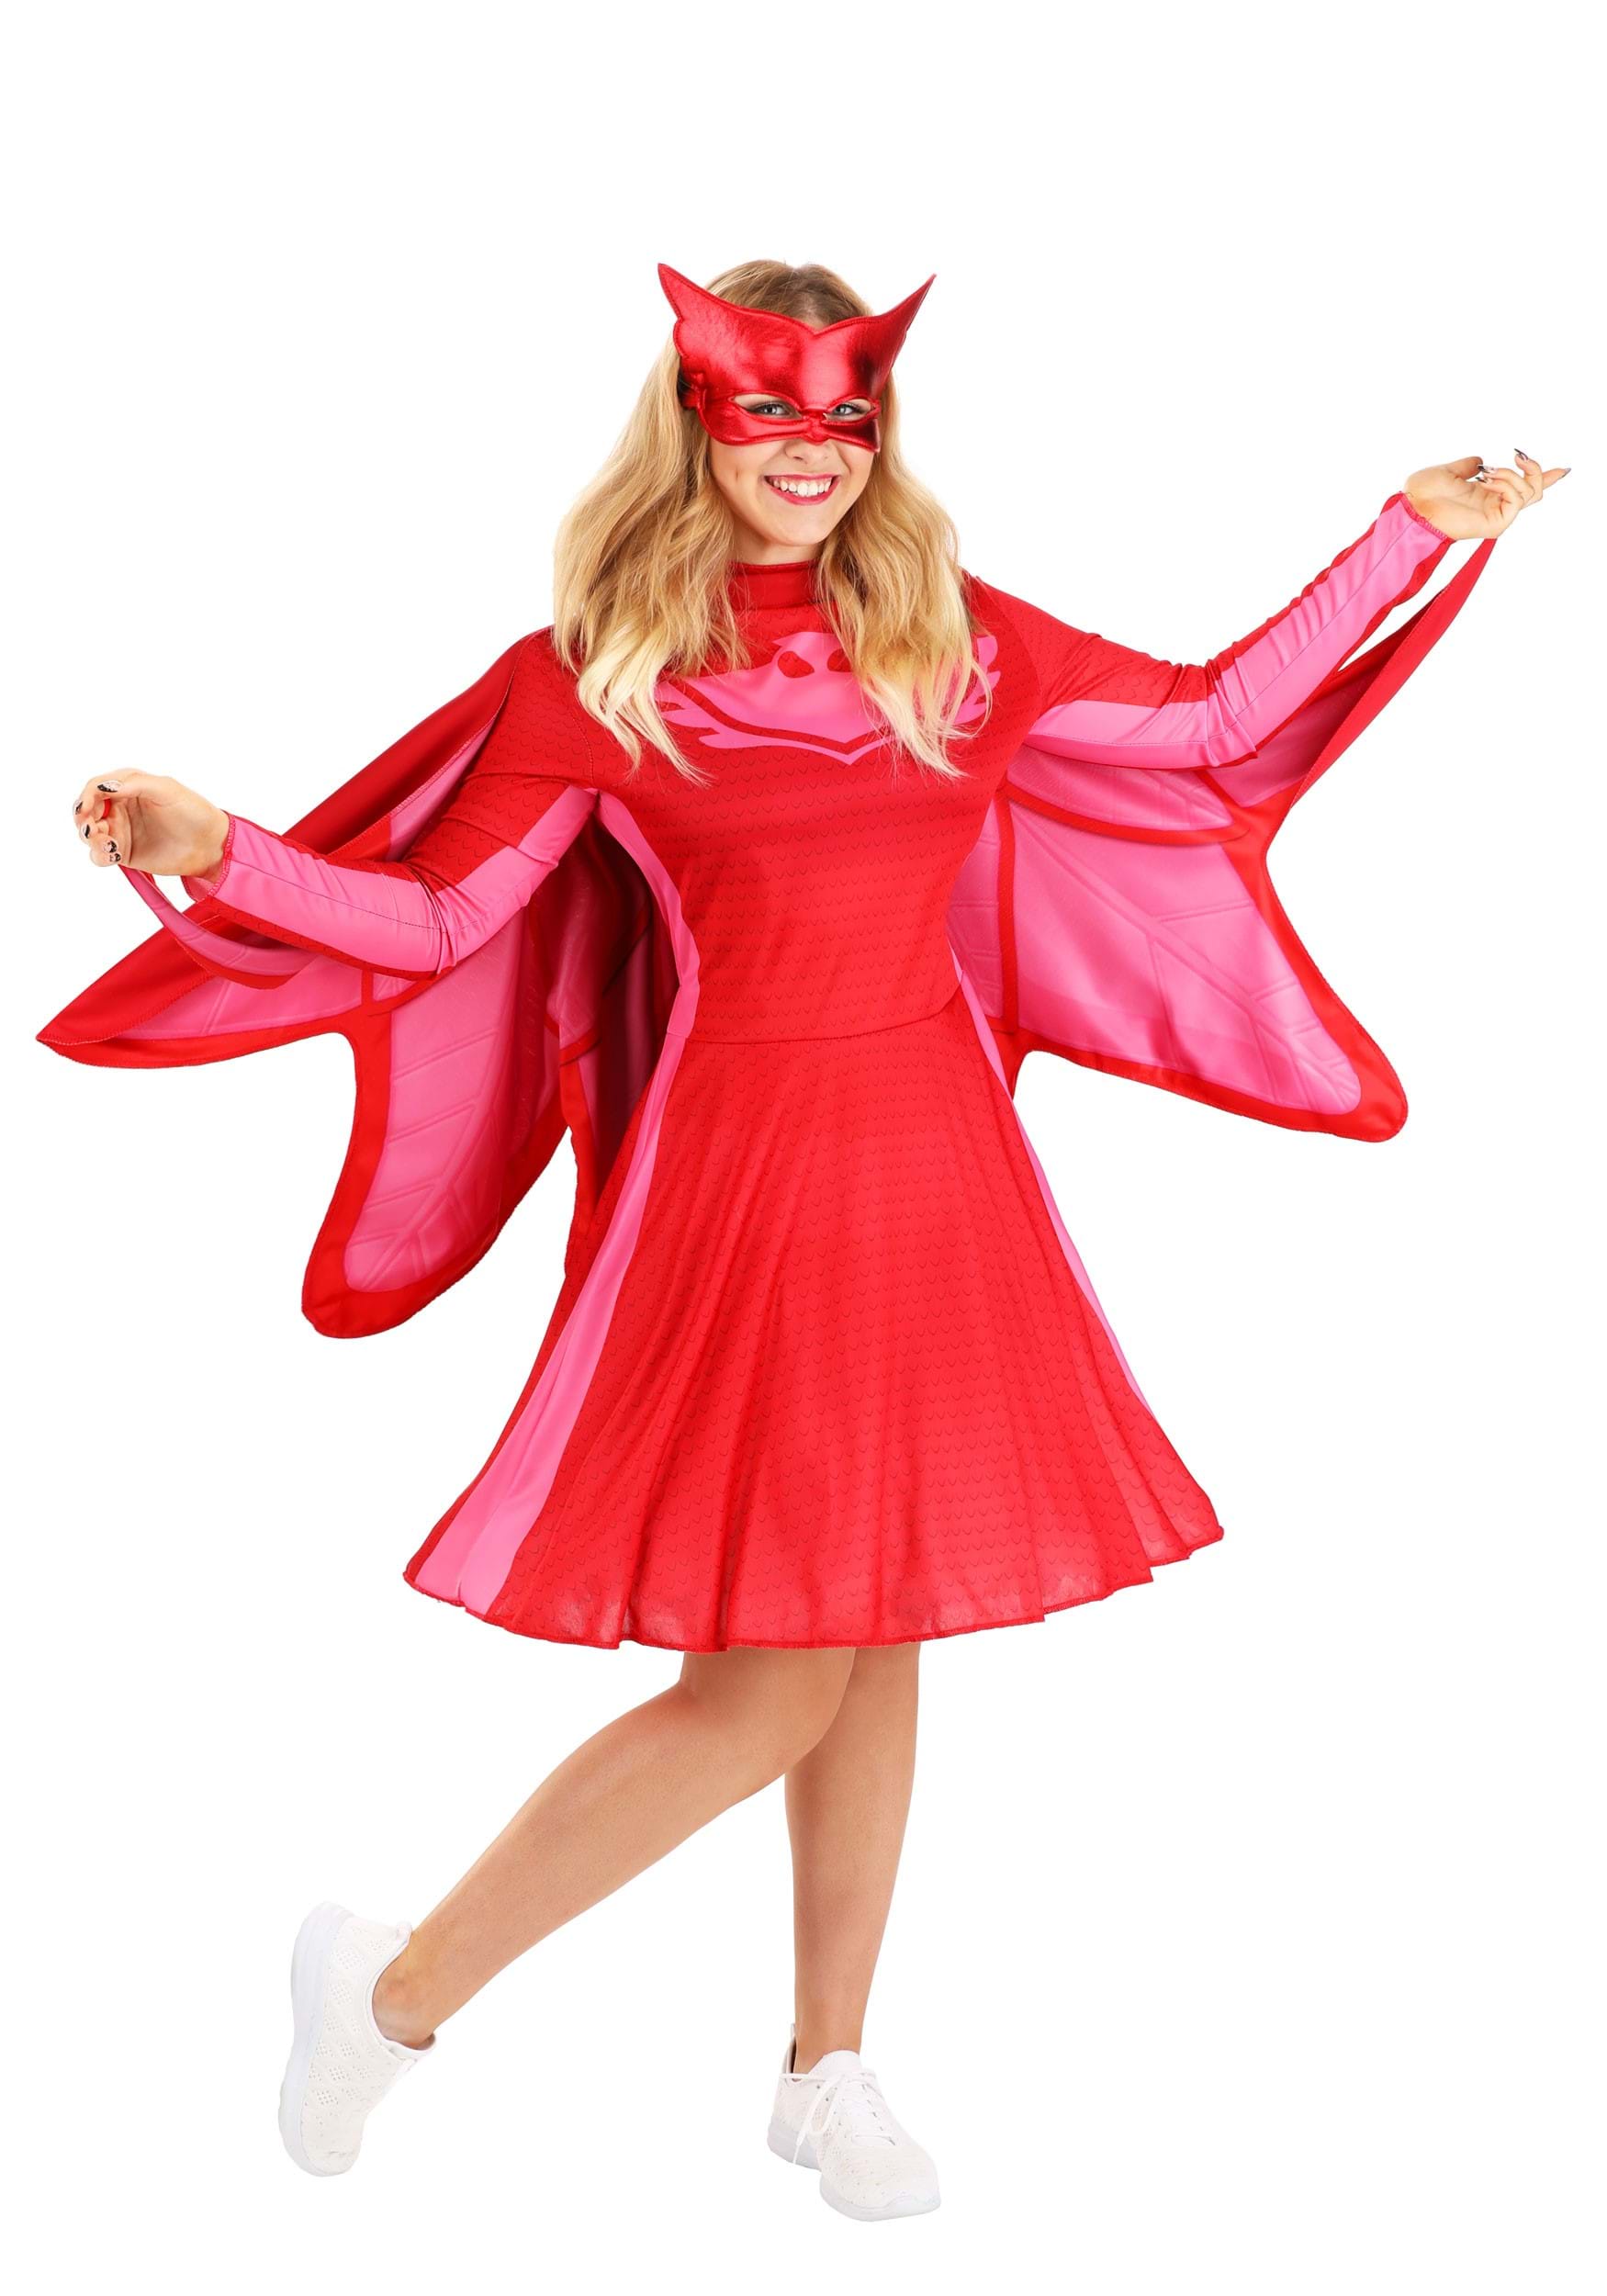 Photos - Fancy Dress PJ Masks Disguise  Owlette Classic Costume for Women Pink/Red DI15212 